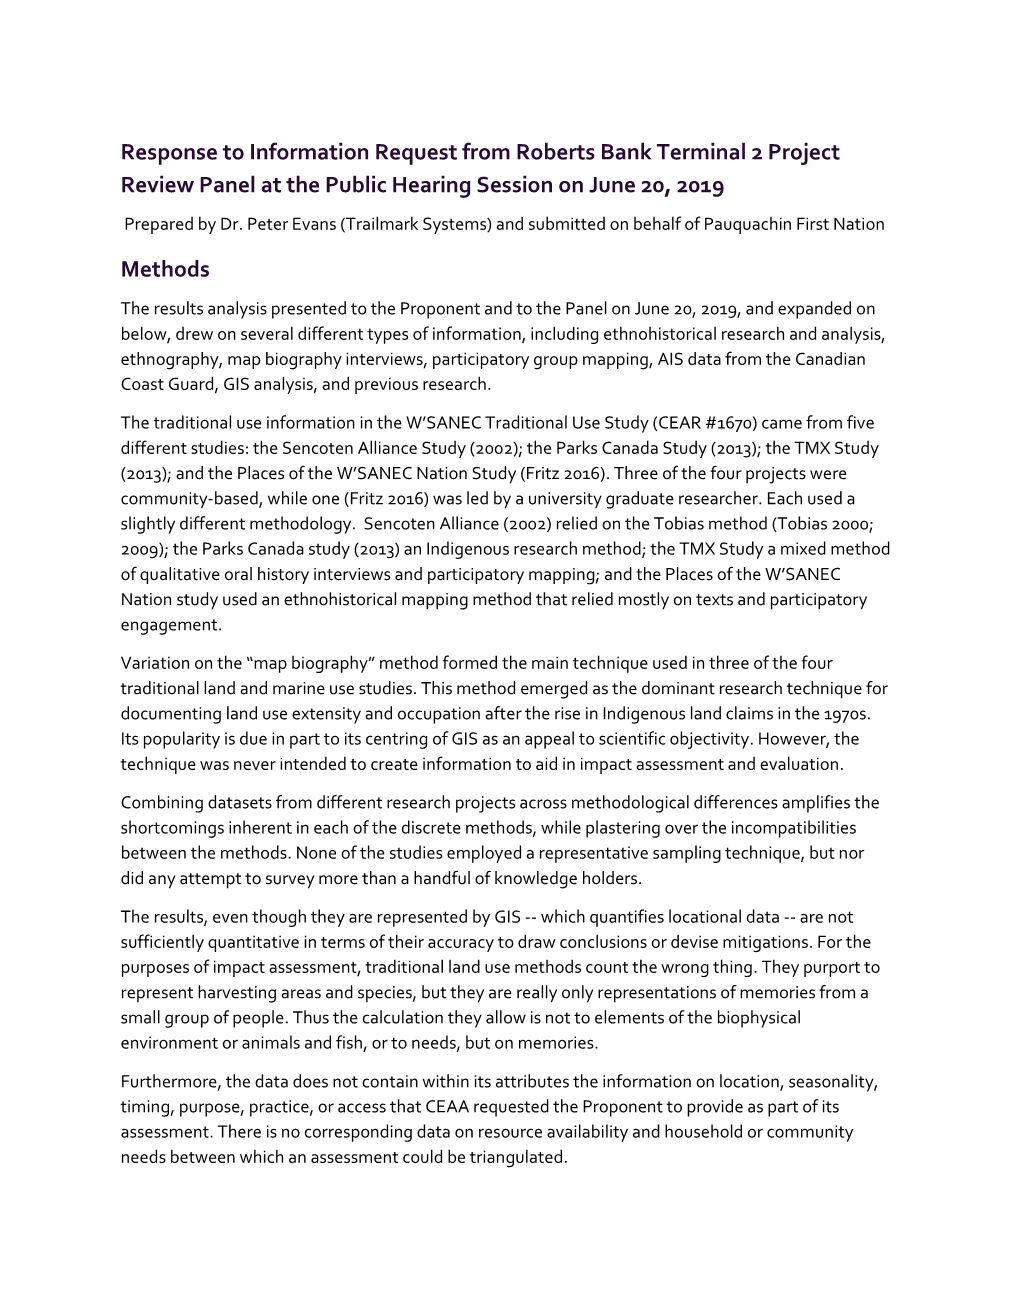 2019-06-28 Pauquachin First Nation Response to RBT2 Review Panel